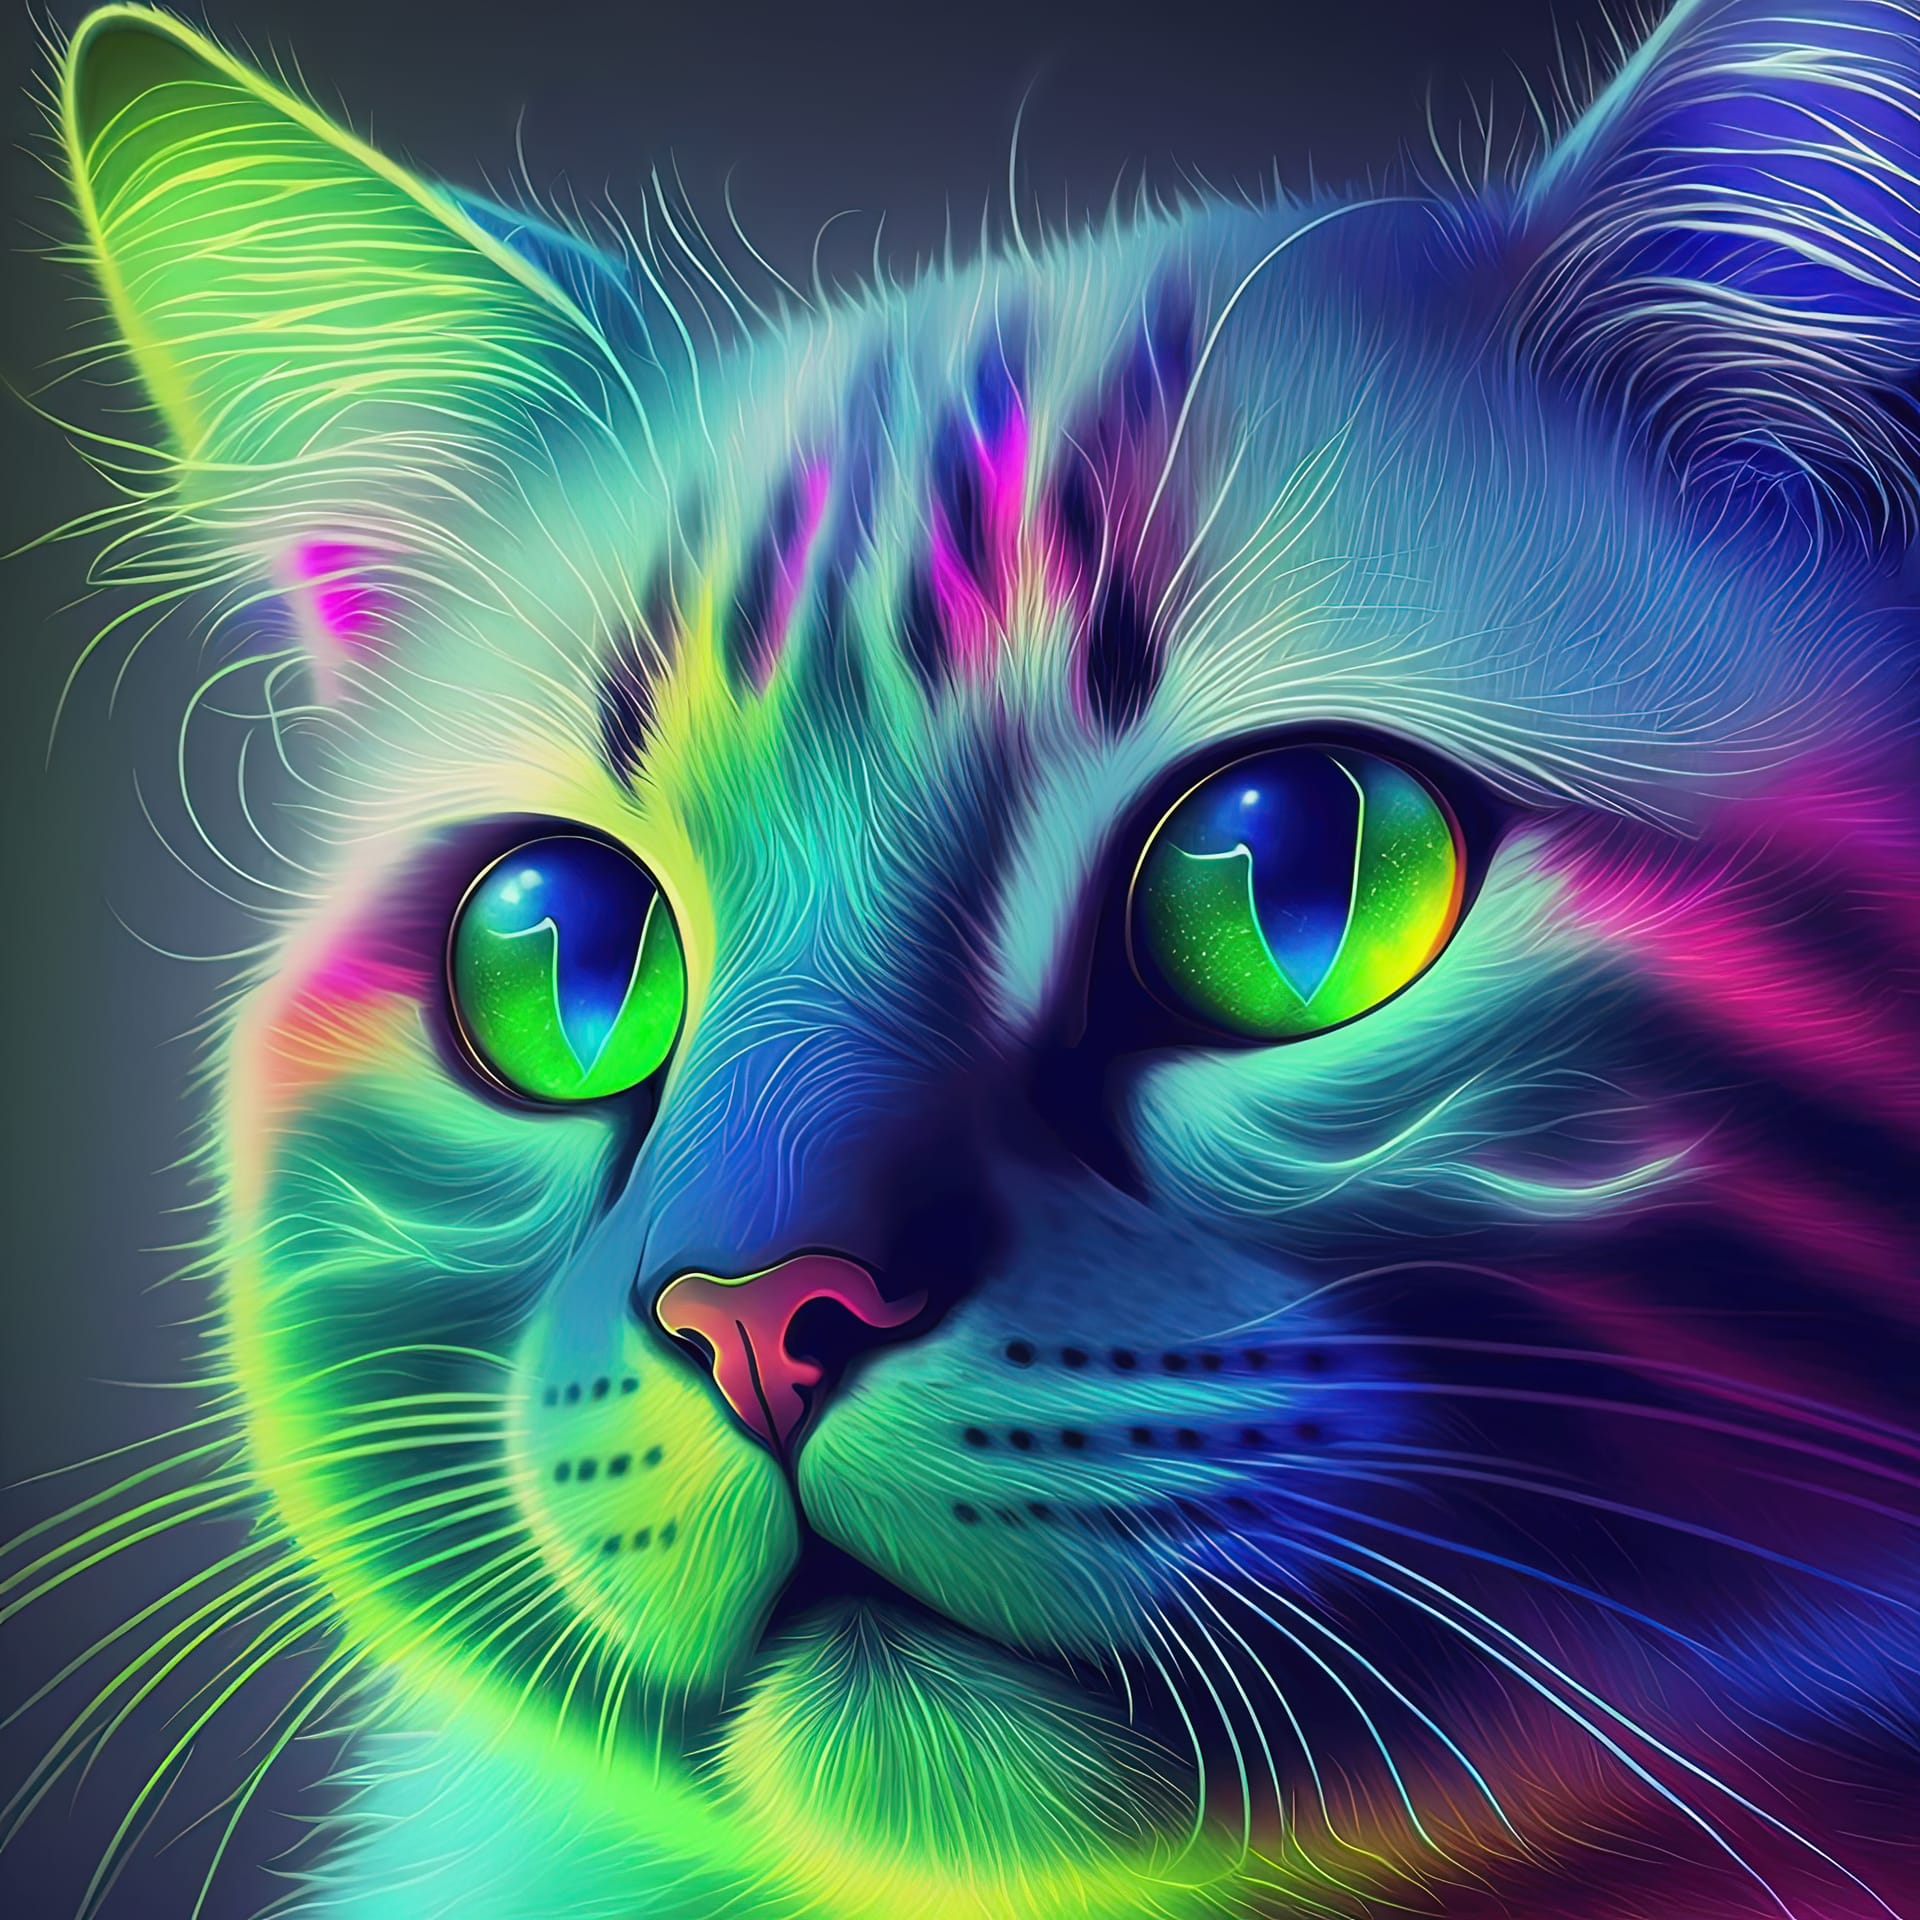 Neon iridescent psychedelic cat based any actual scene pattern